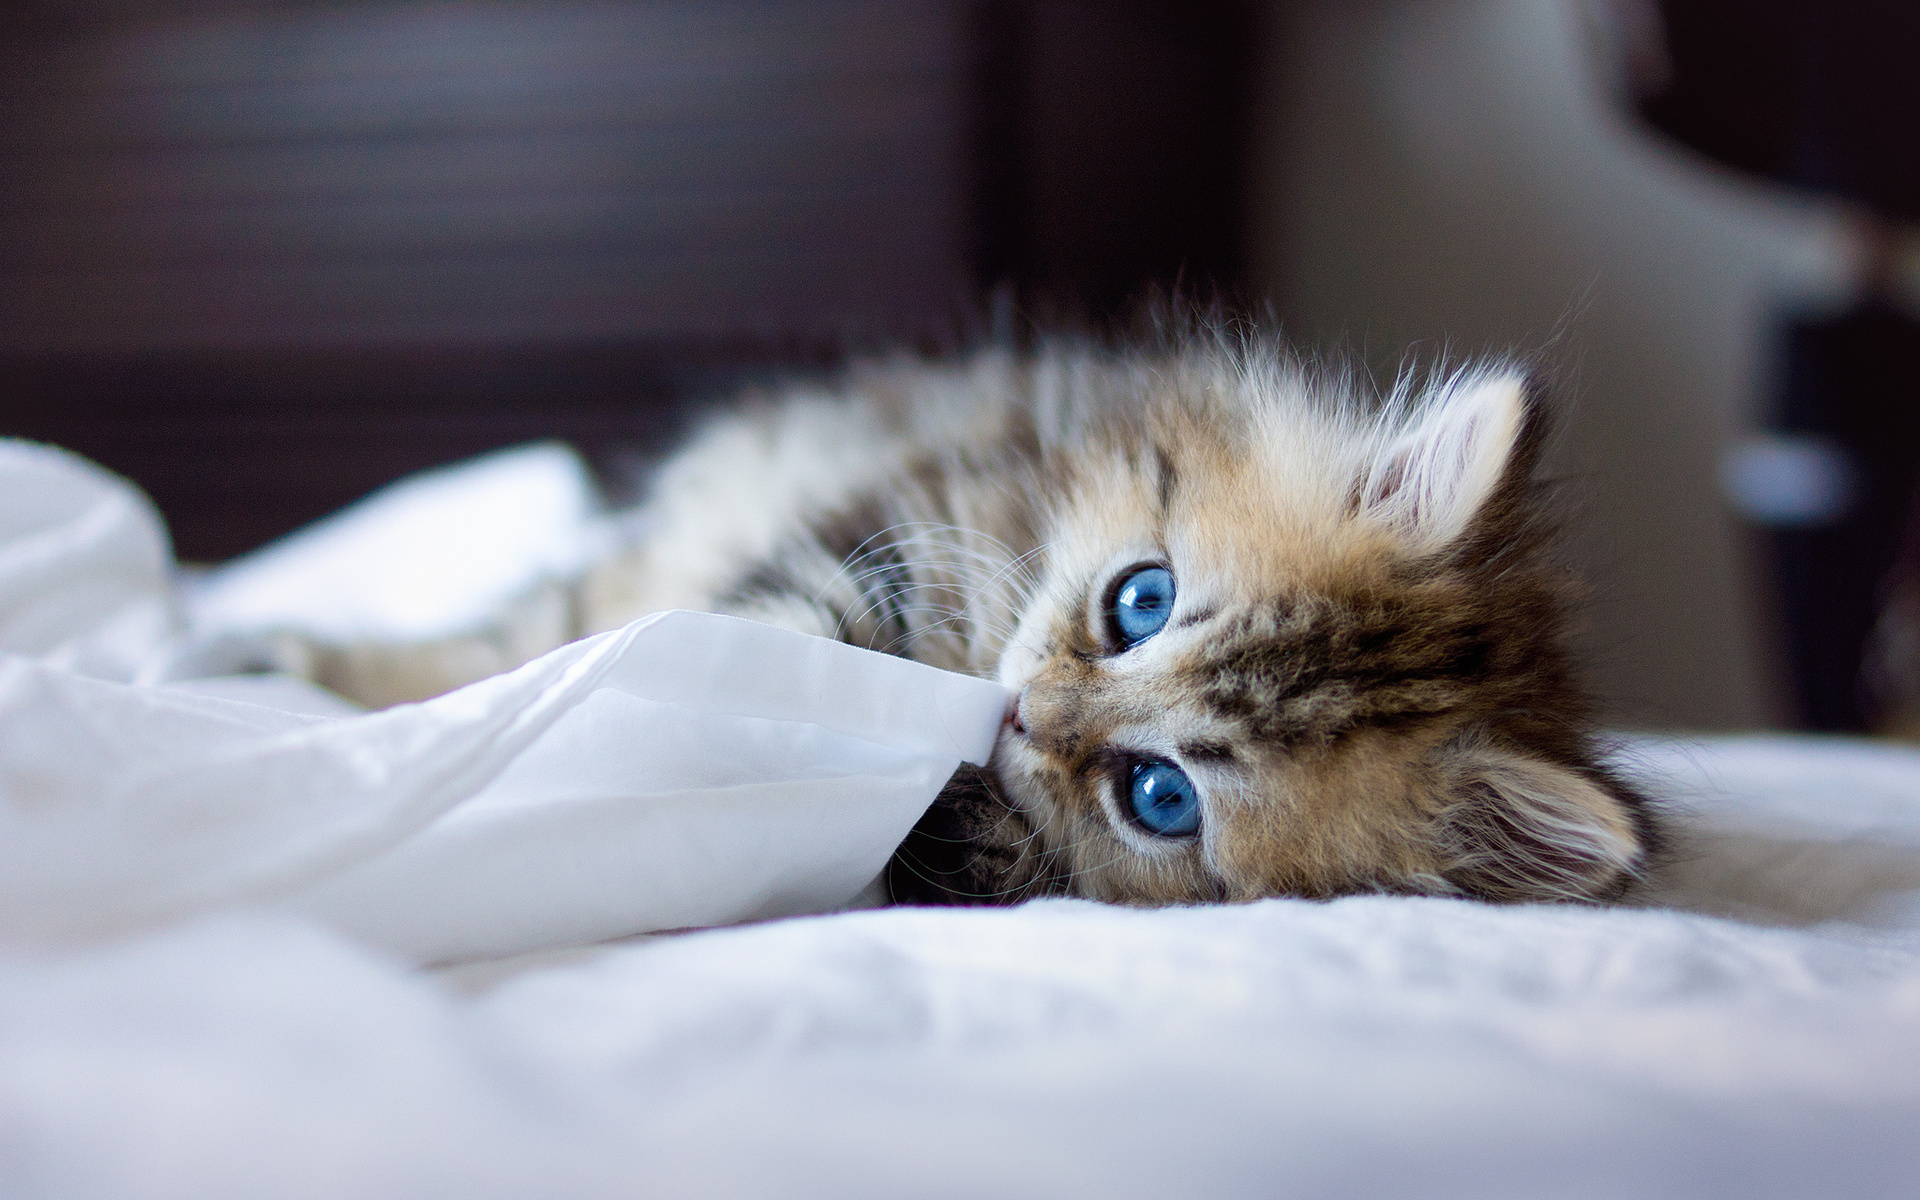 animals, Cats, Felines, Kittens, Face, Eyes, Blue, Whiskers, Play, Cute, Fur, Look, Stare, Babies Wallpaper